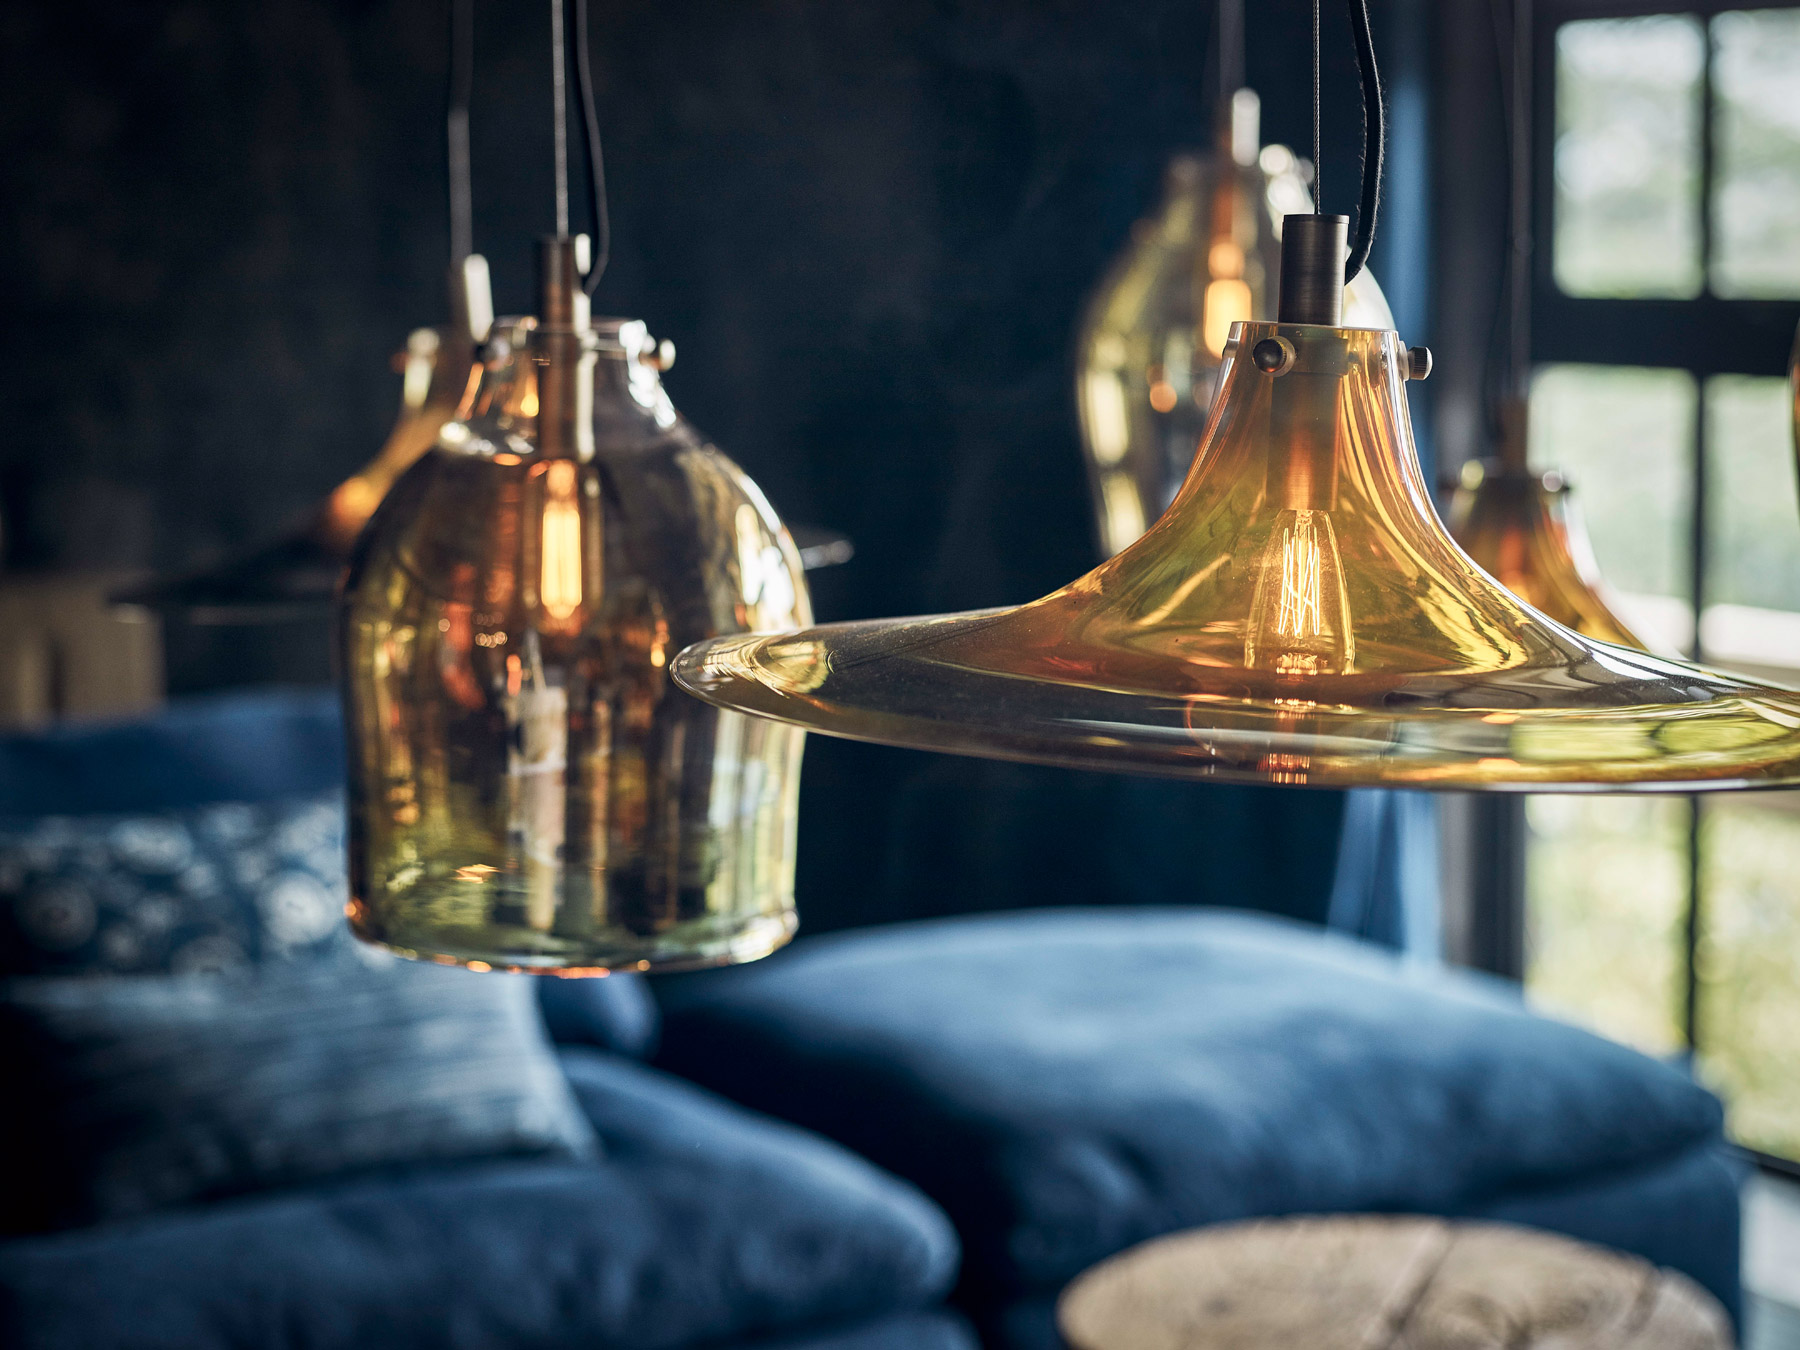 5 of our favourite designs from Timothy Oulton’s plush, new Noble Souls collection